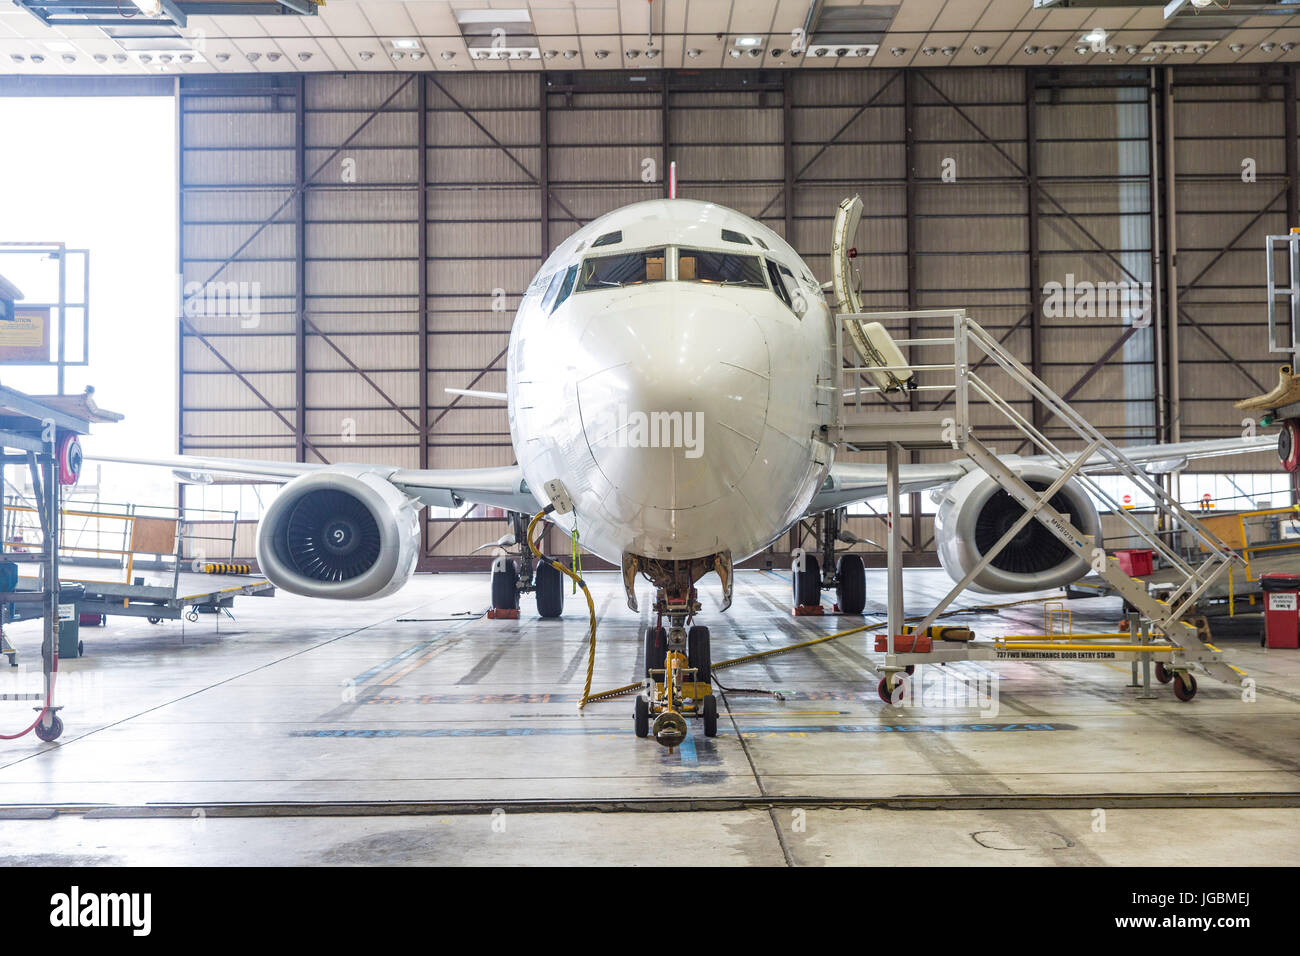 An Airliner in the Maintenance Hangar Stock Photo